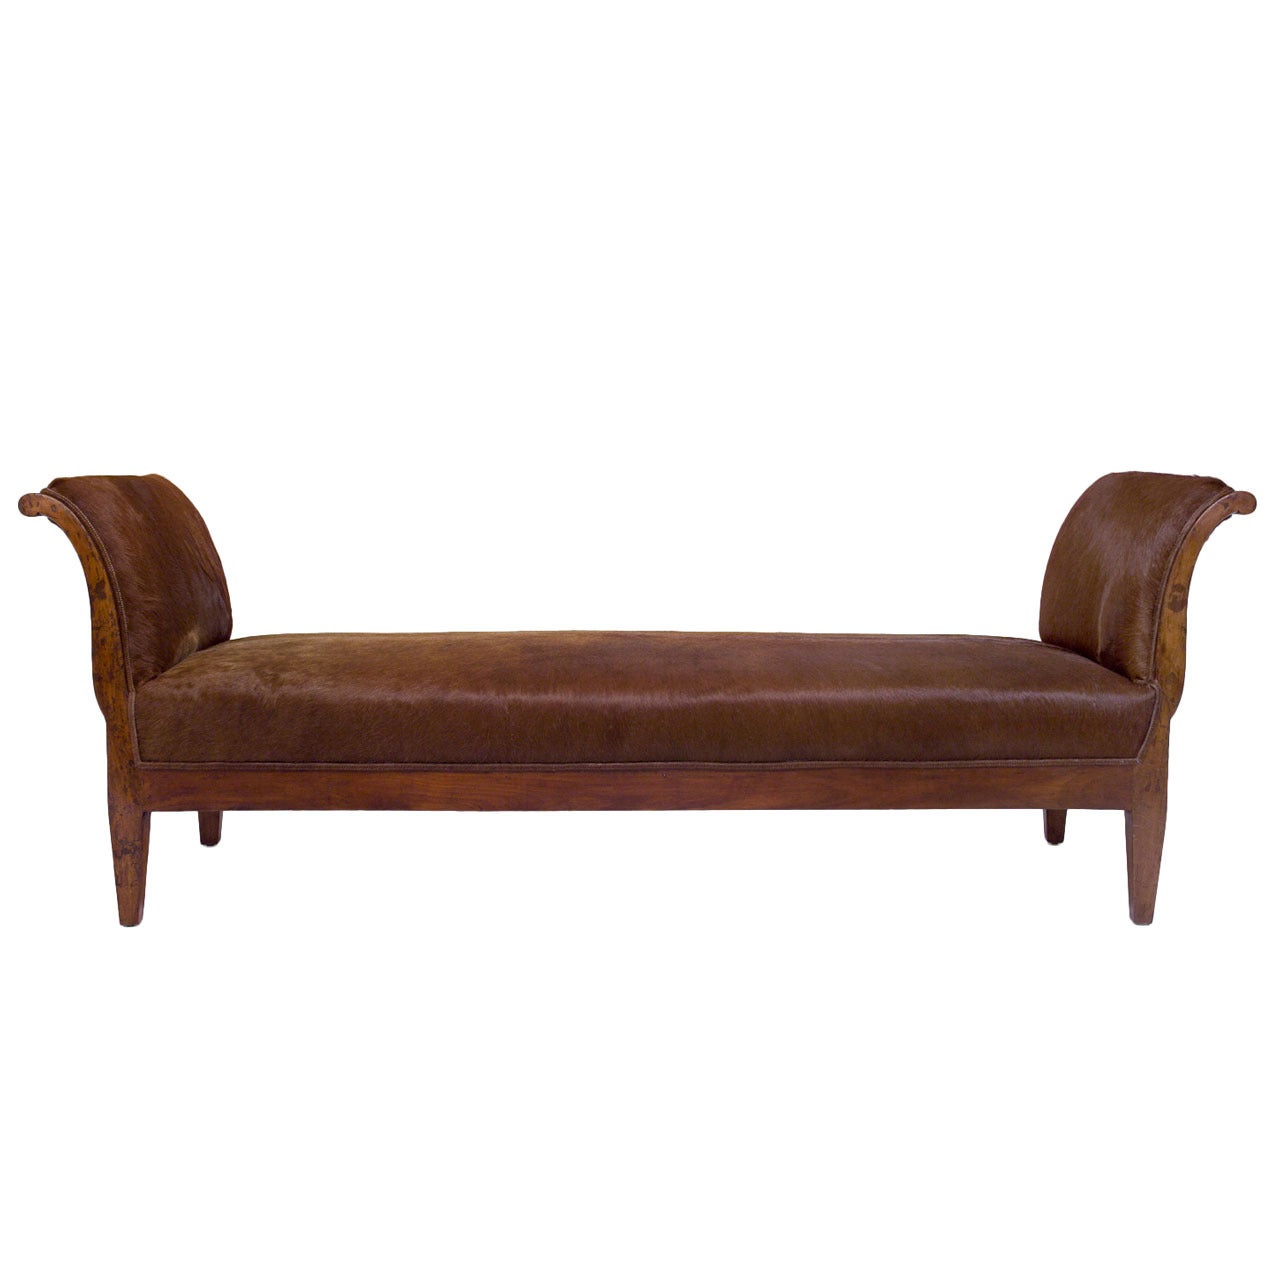 19th Century French Walnut Chaise